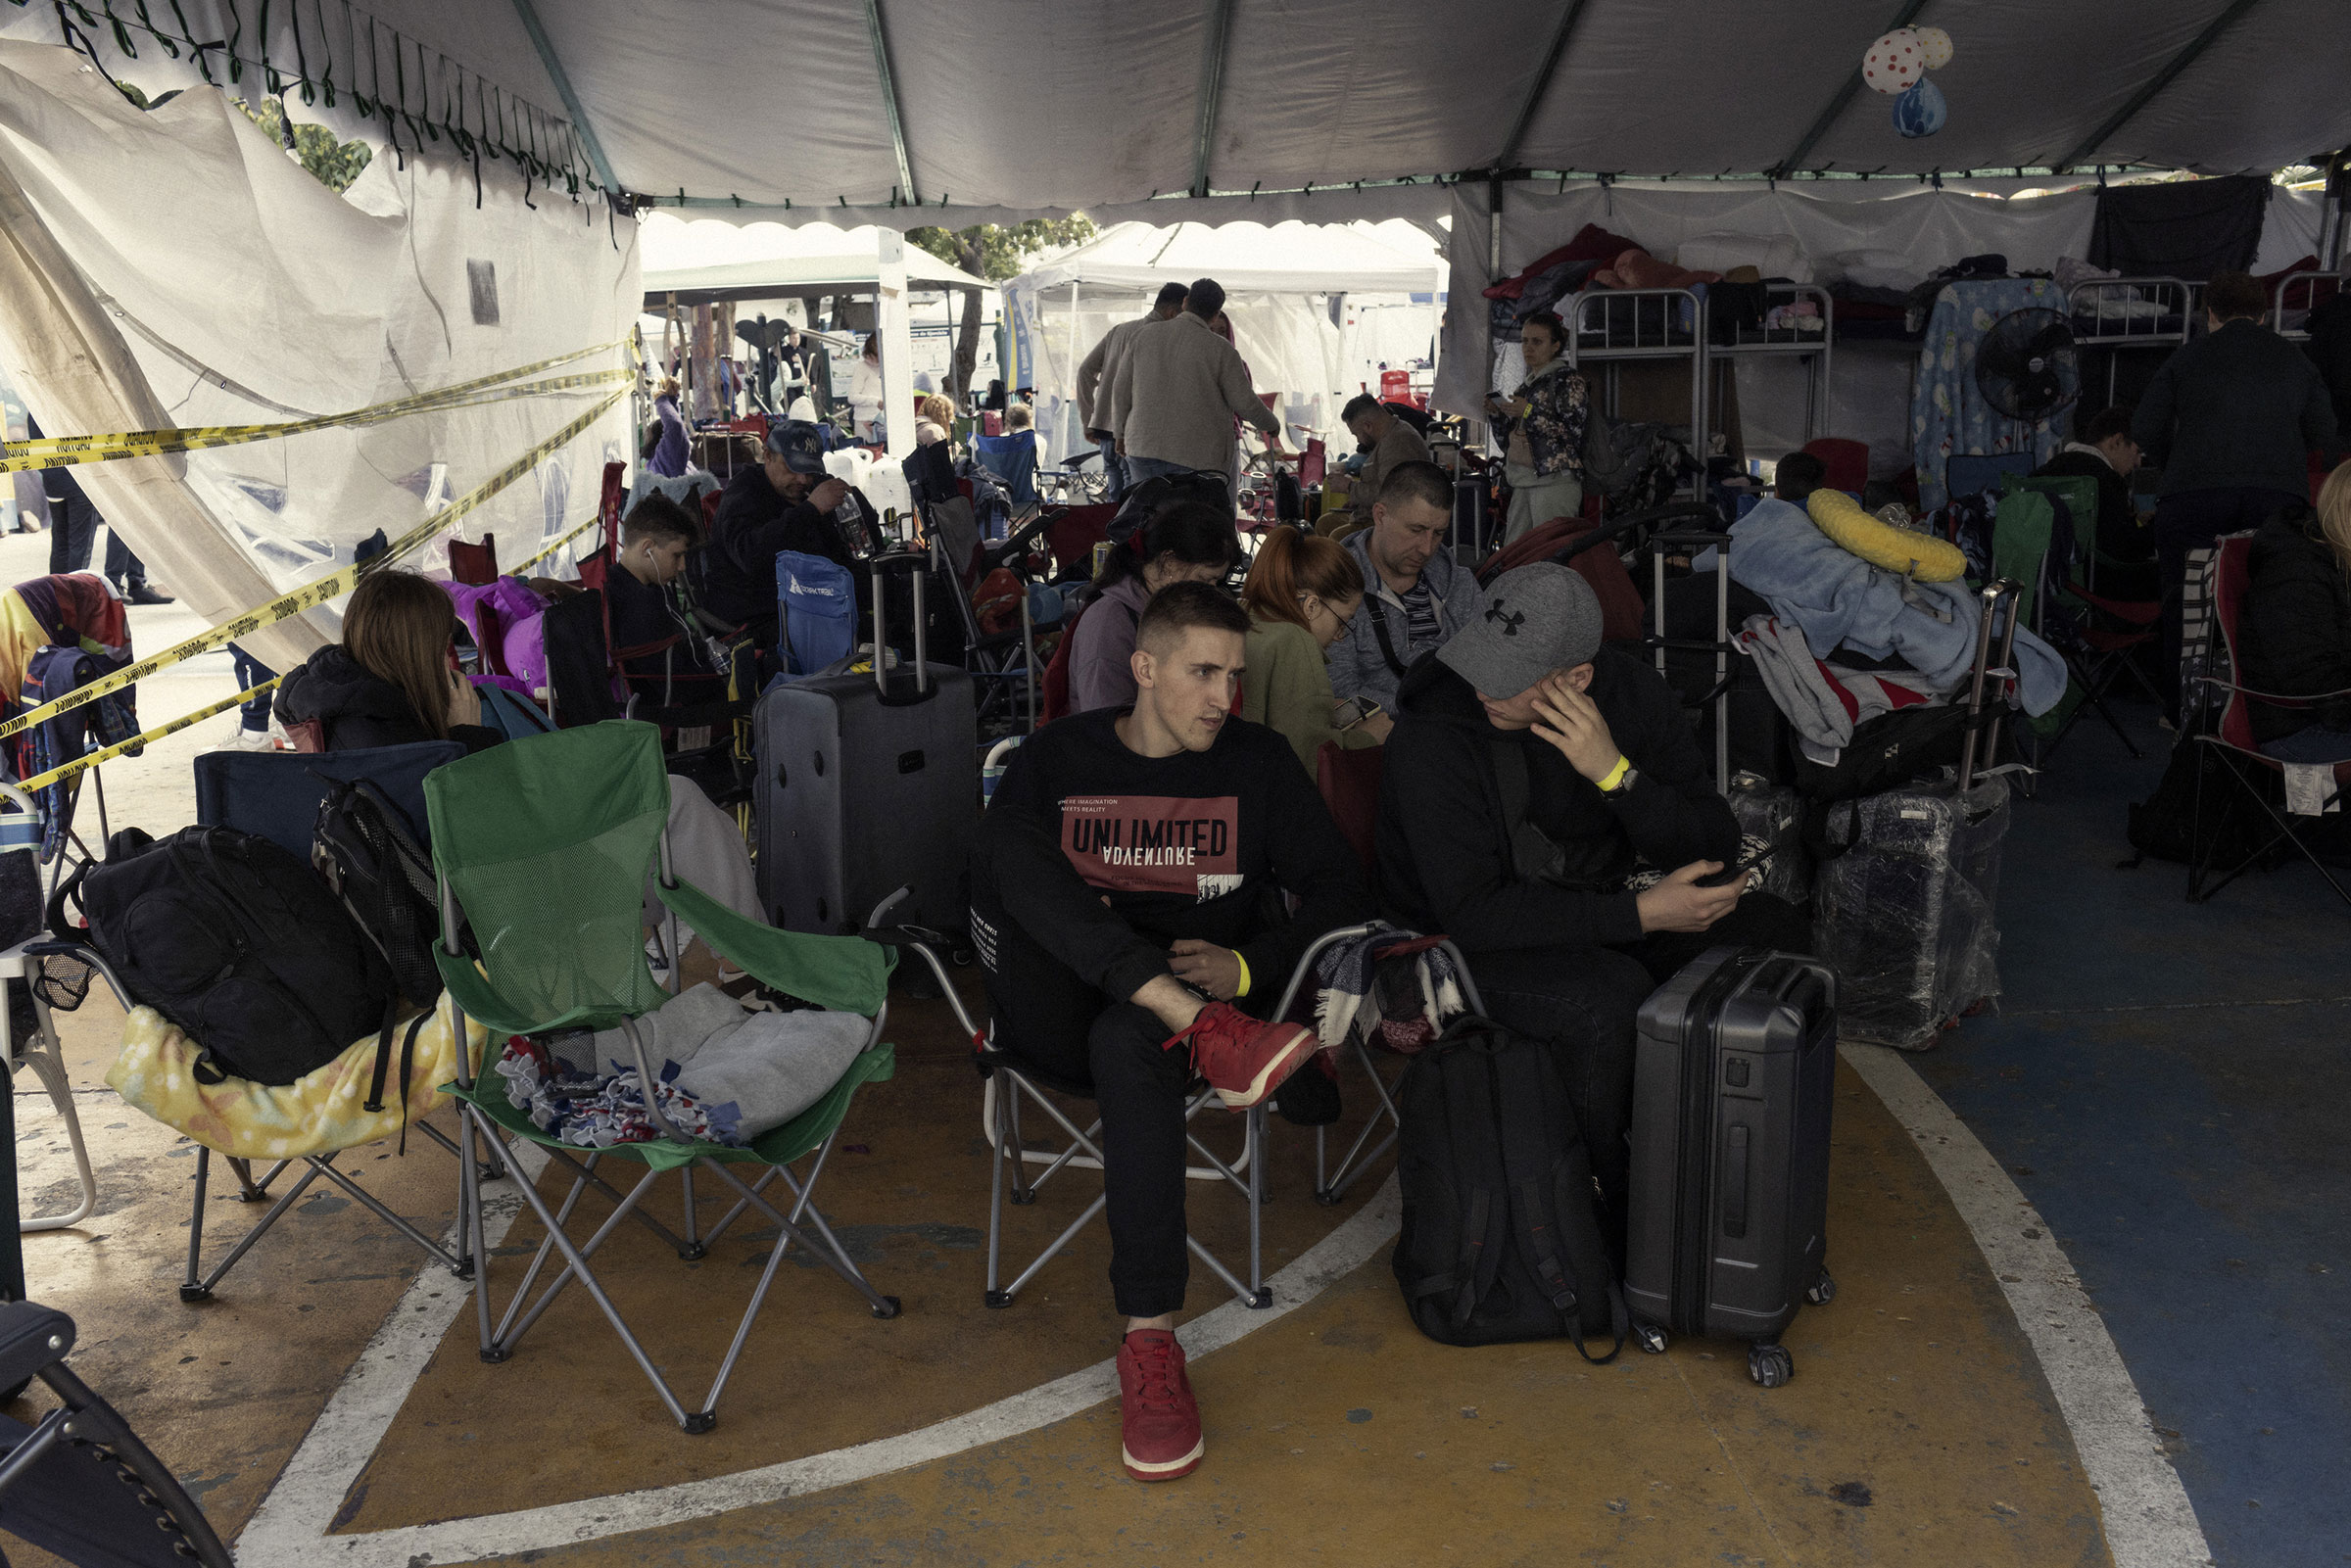 Ukrainian refugees at a humanitarian shelter in Tijuana, Mexico, on April 22, 2022. (Nicolo Filippo Rosso—Bloomberg/Getty Images)